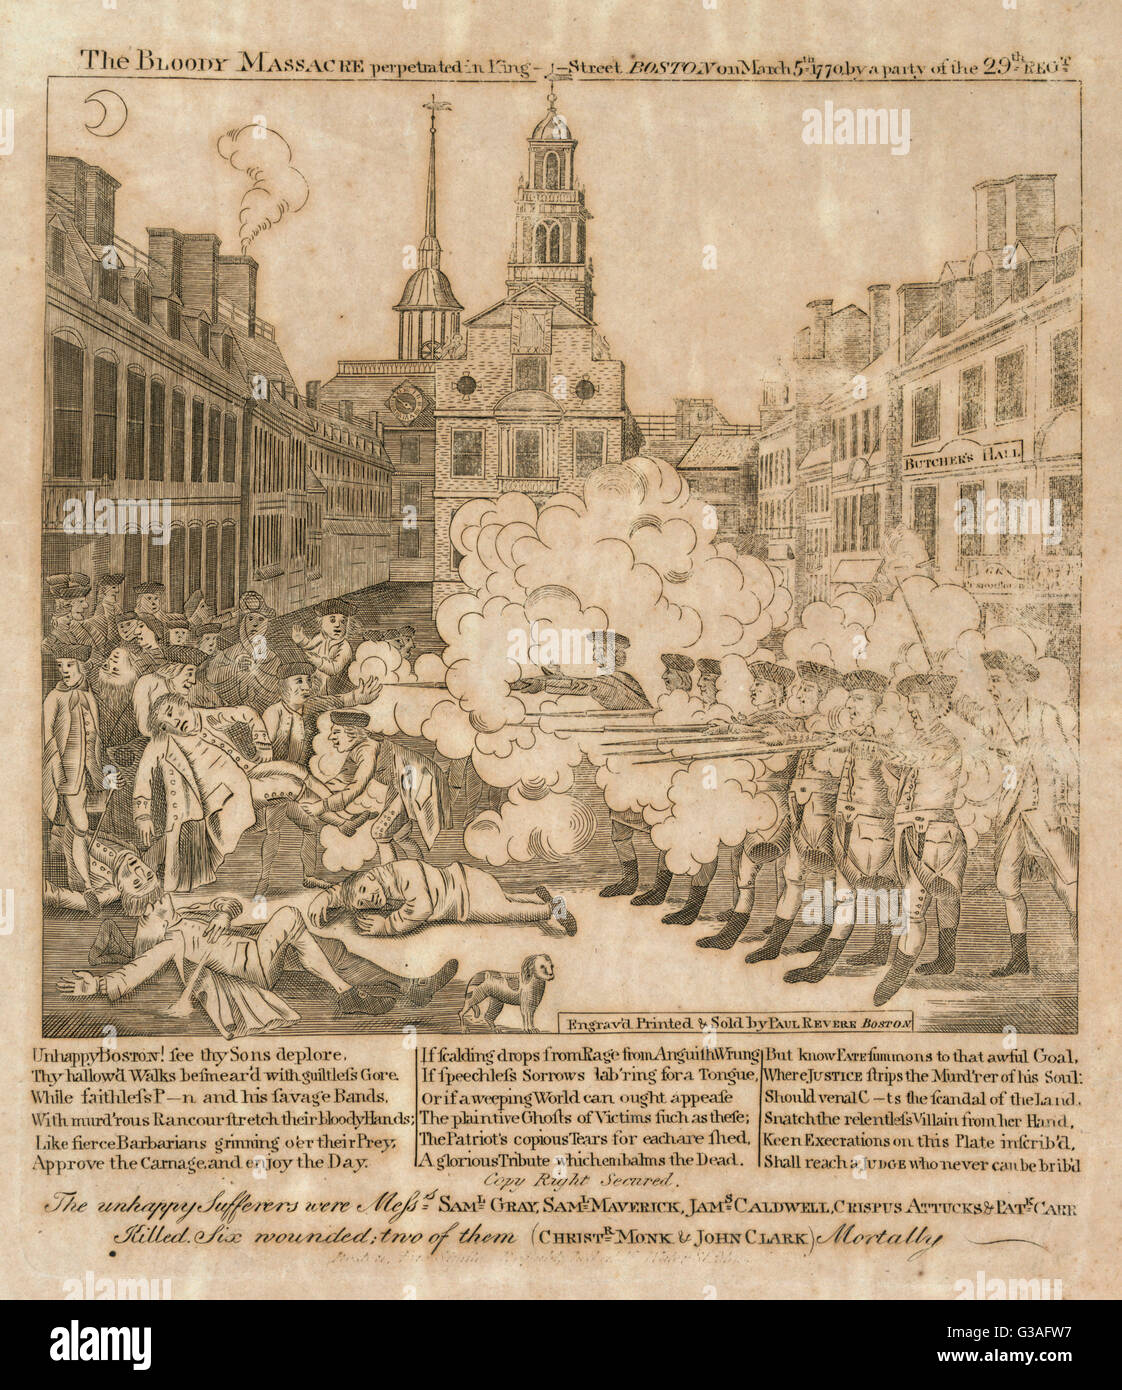 The bloody massacre perpetrated in King Street Boston on Mar Stock Photo